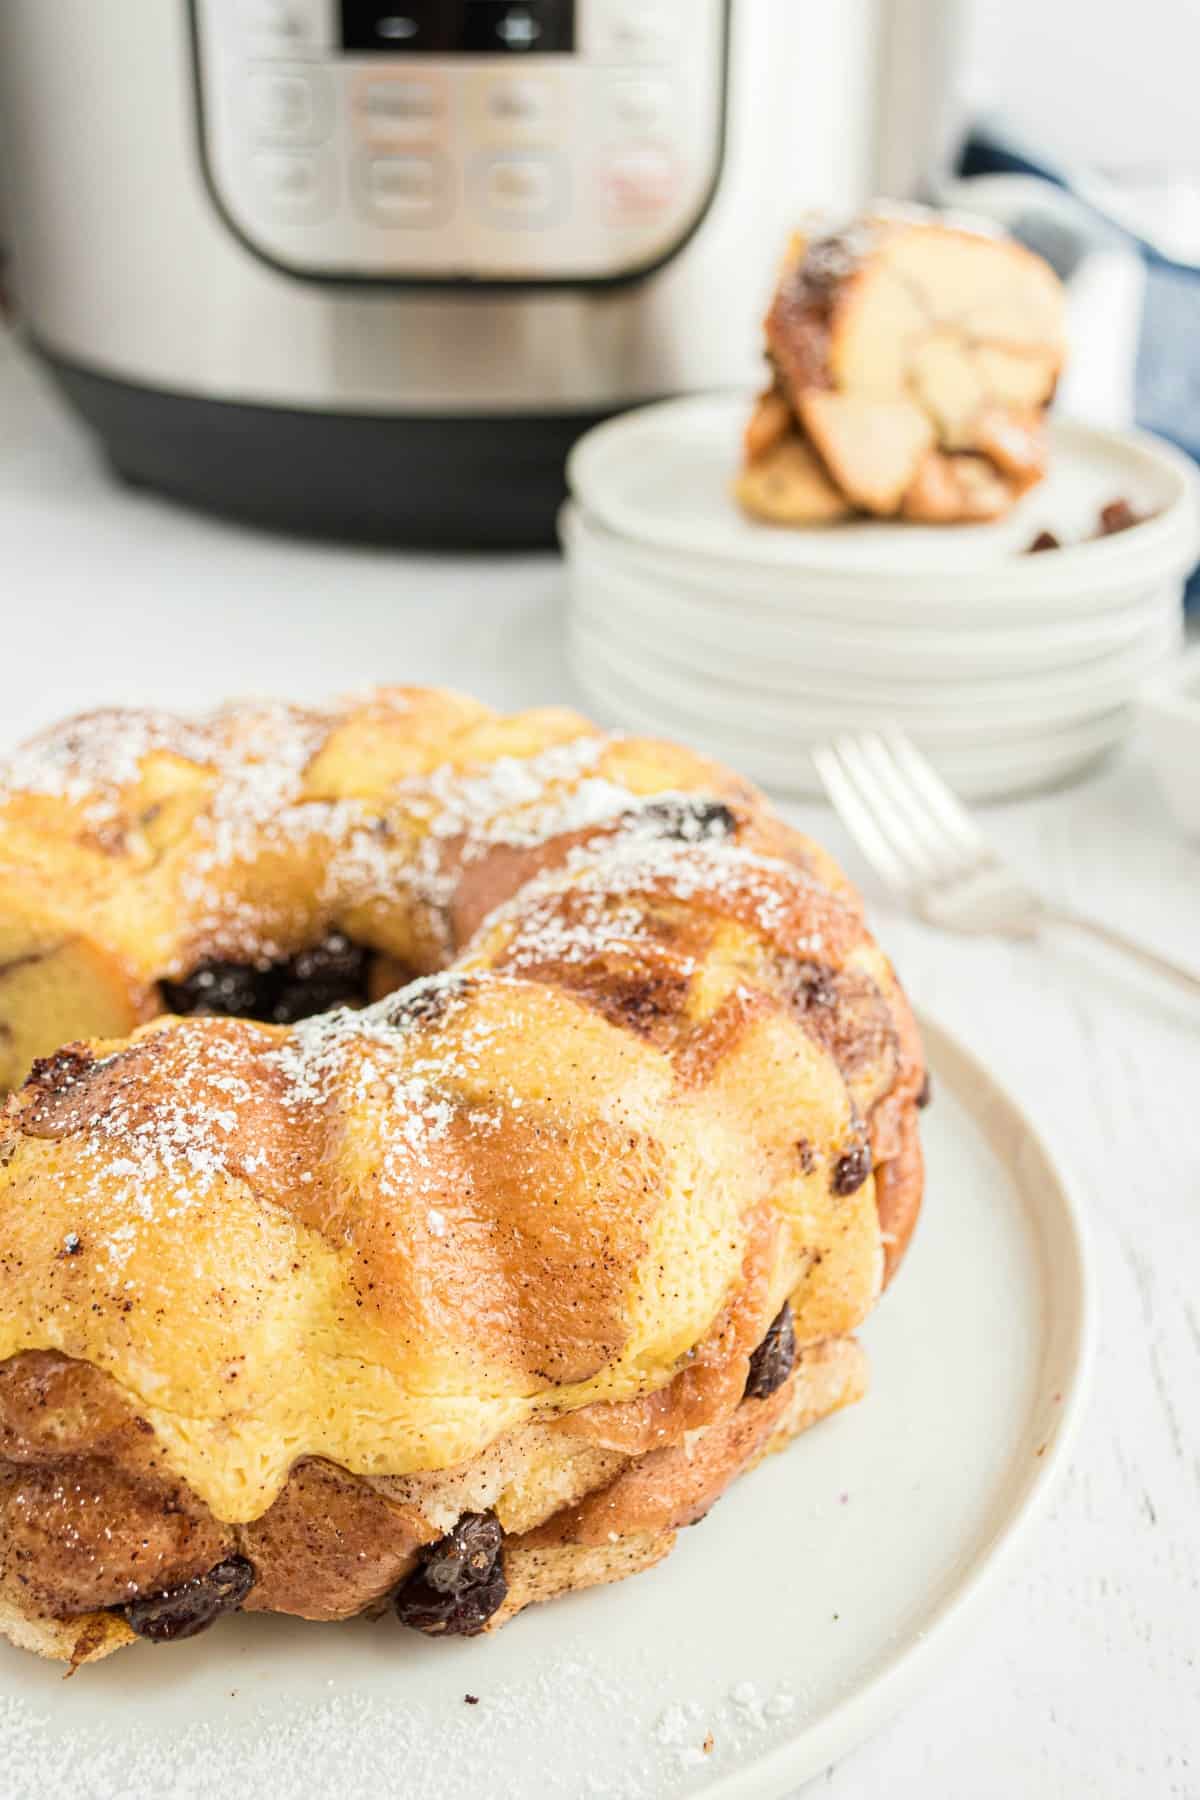 Bread pudding made in a bundt pan in the Instant Pot.